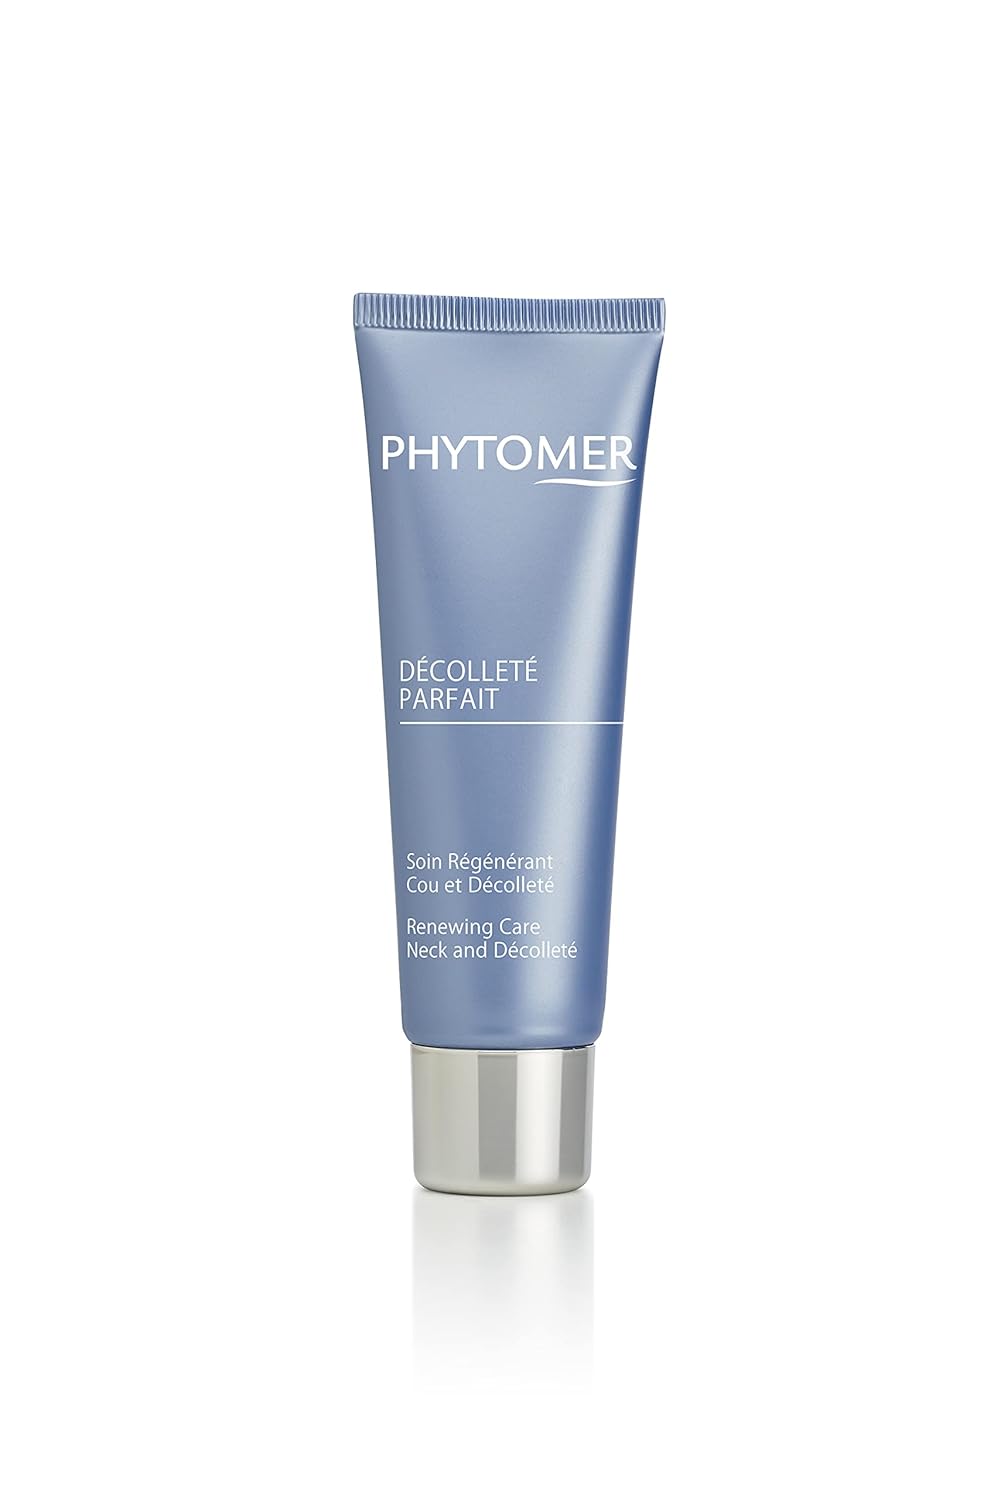 Phytomer Décolleté Parfait Neck Firming Cream | Anti-Aging Skin Tightening Gel-Cream for Neck & Chest| Helps Reduce Signs of Aging | Reduces Dark Spots & Wrinkles | 50